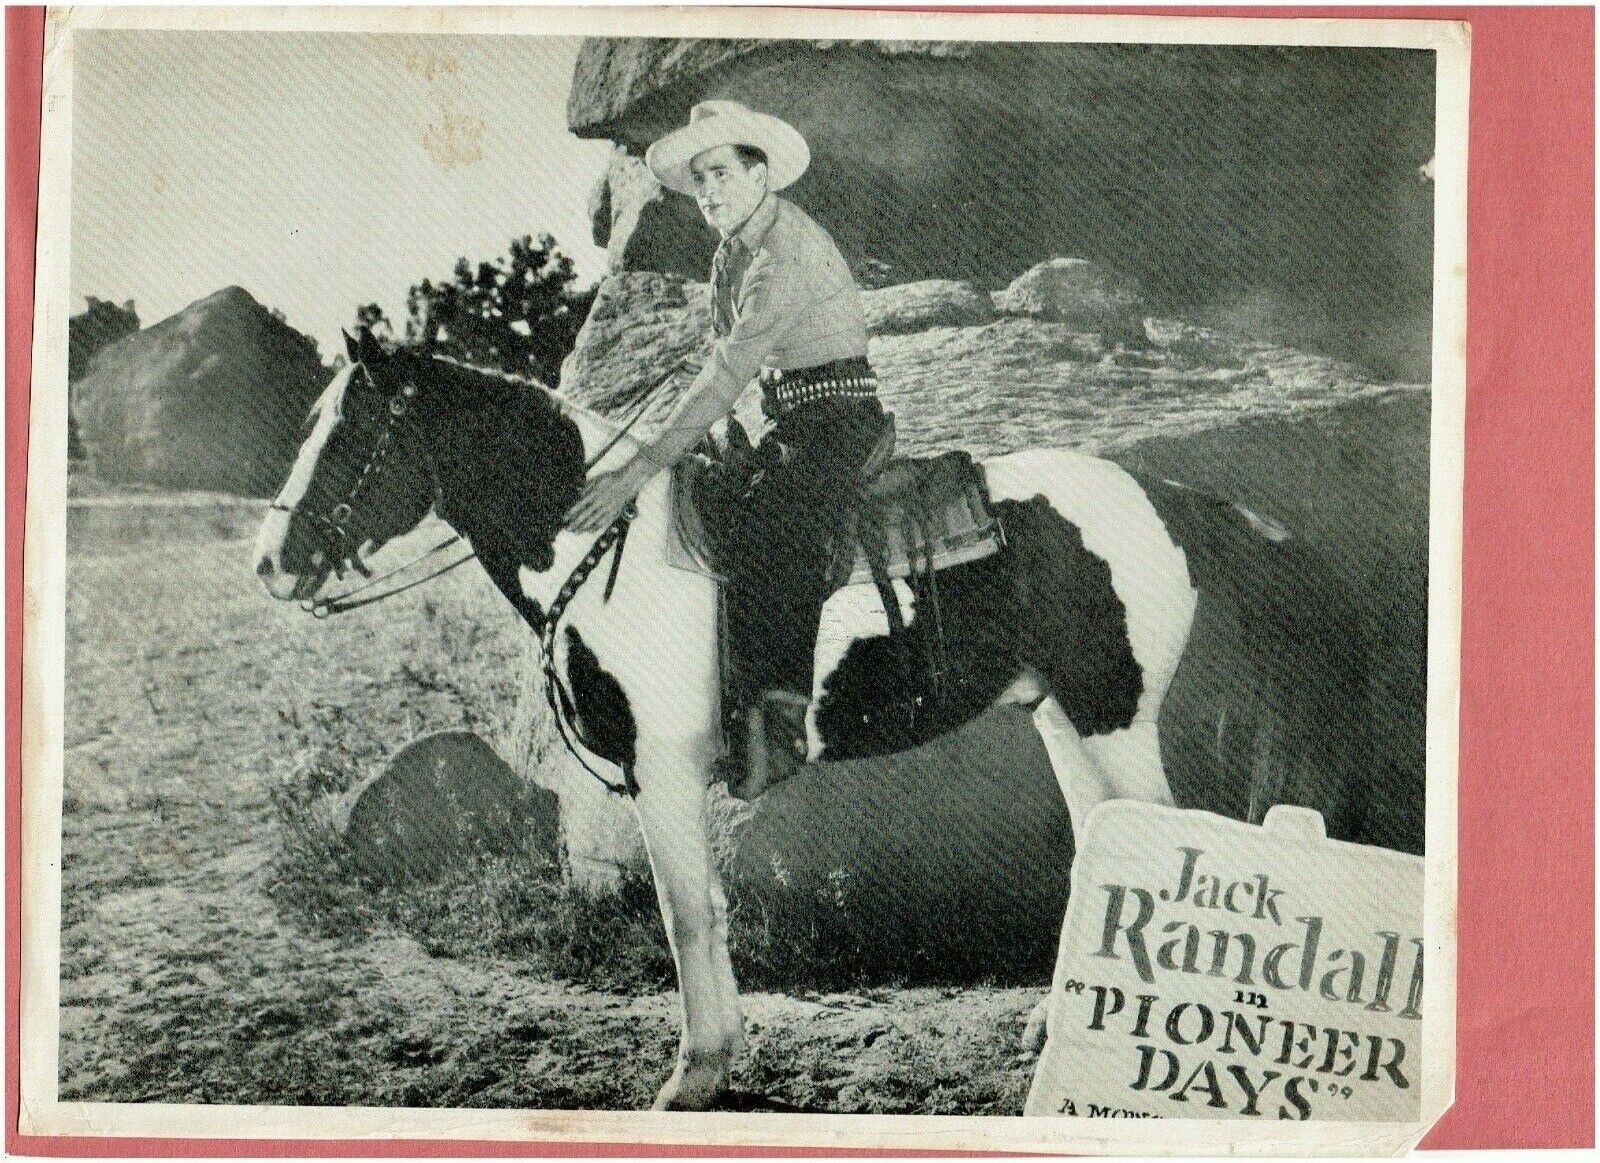 Movie Studio Promo Photograph Featuring Jack Randall in Pioneer Days